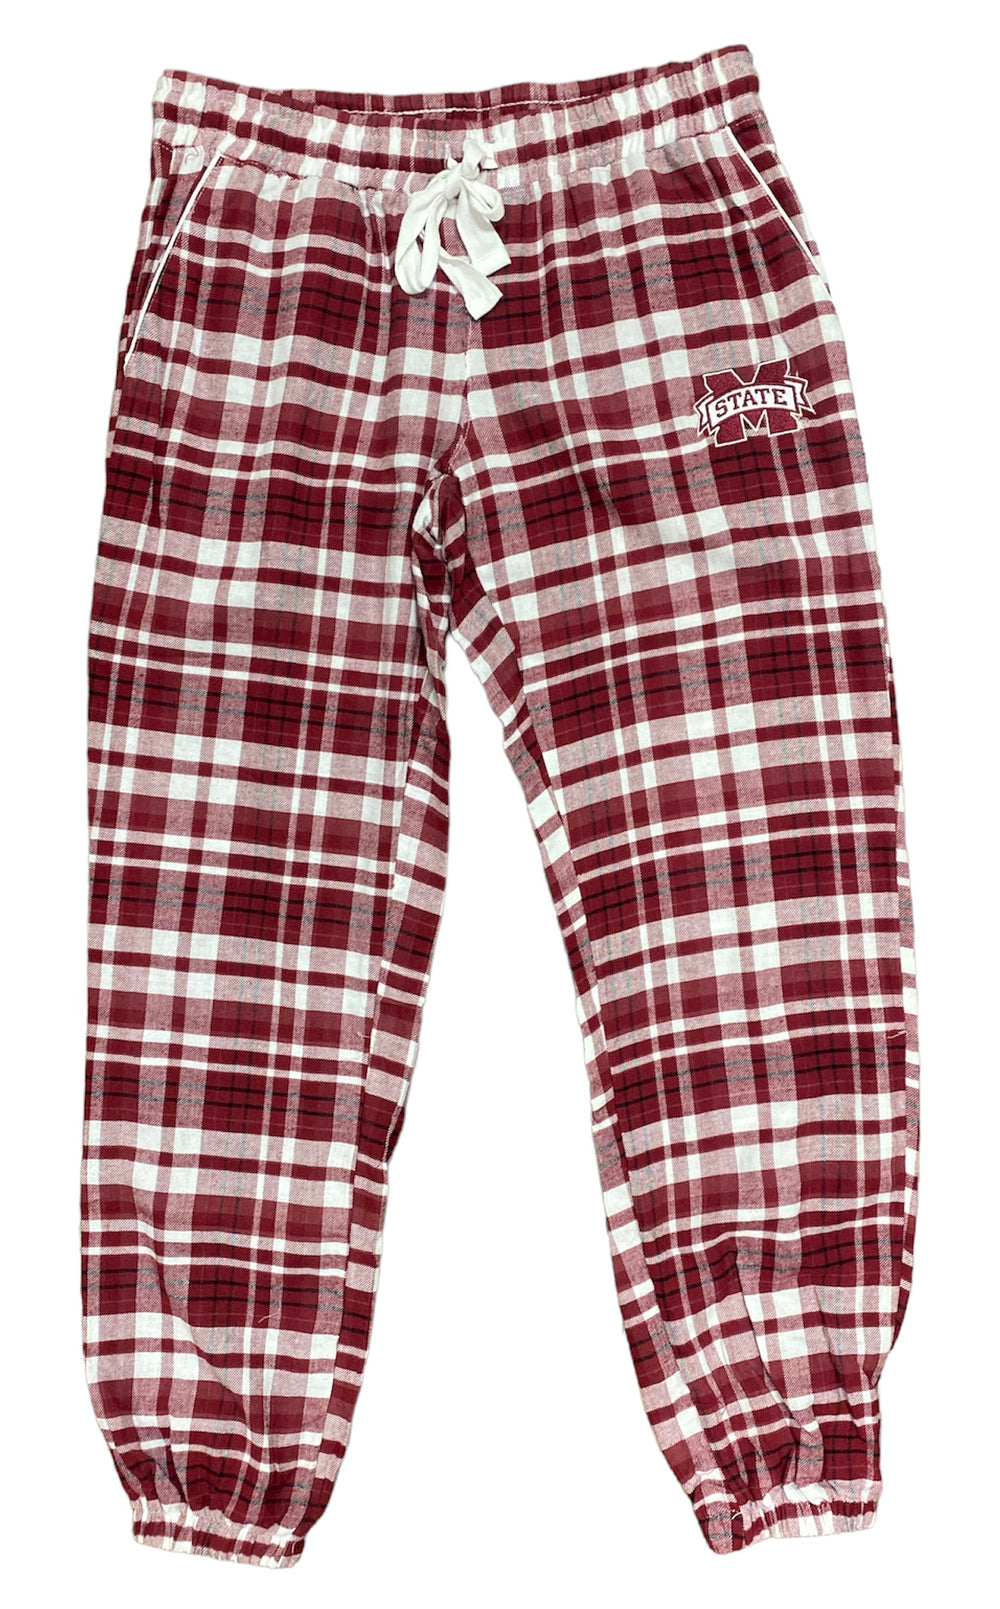 Concepts Women's Jogger Lounge Pants - Mississippi State University